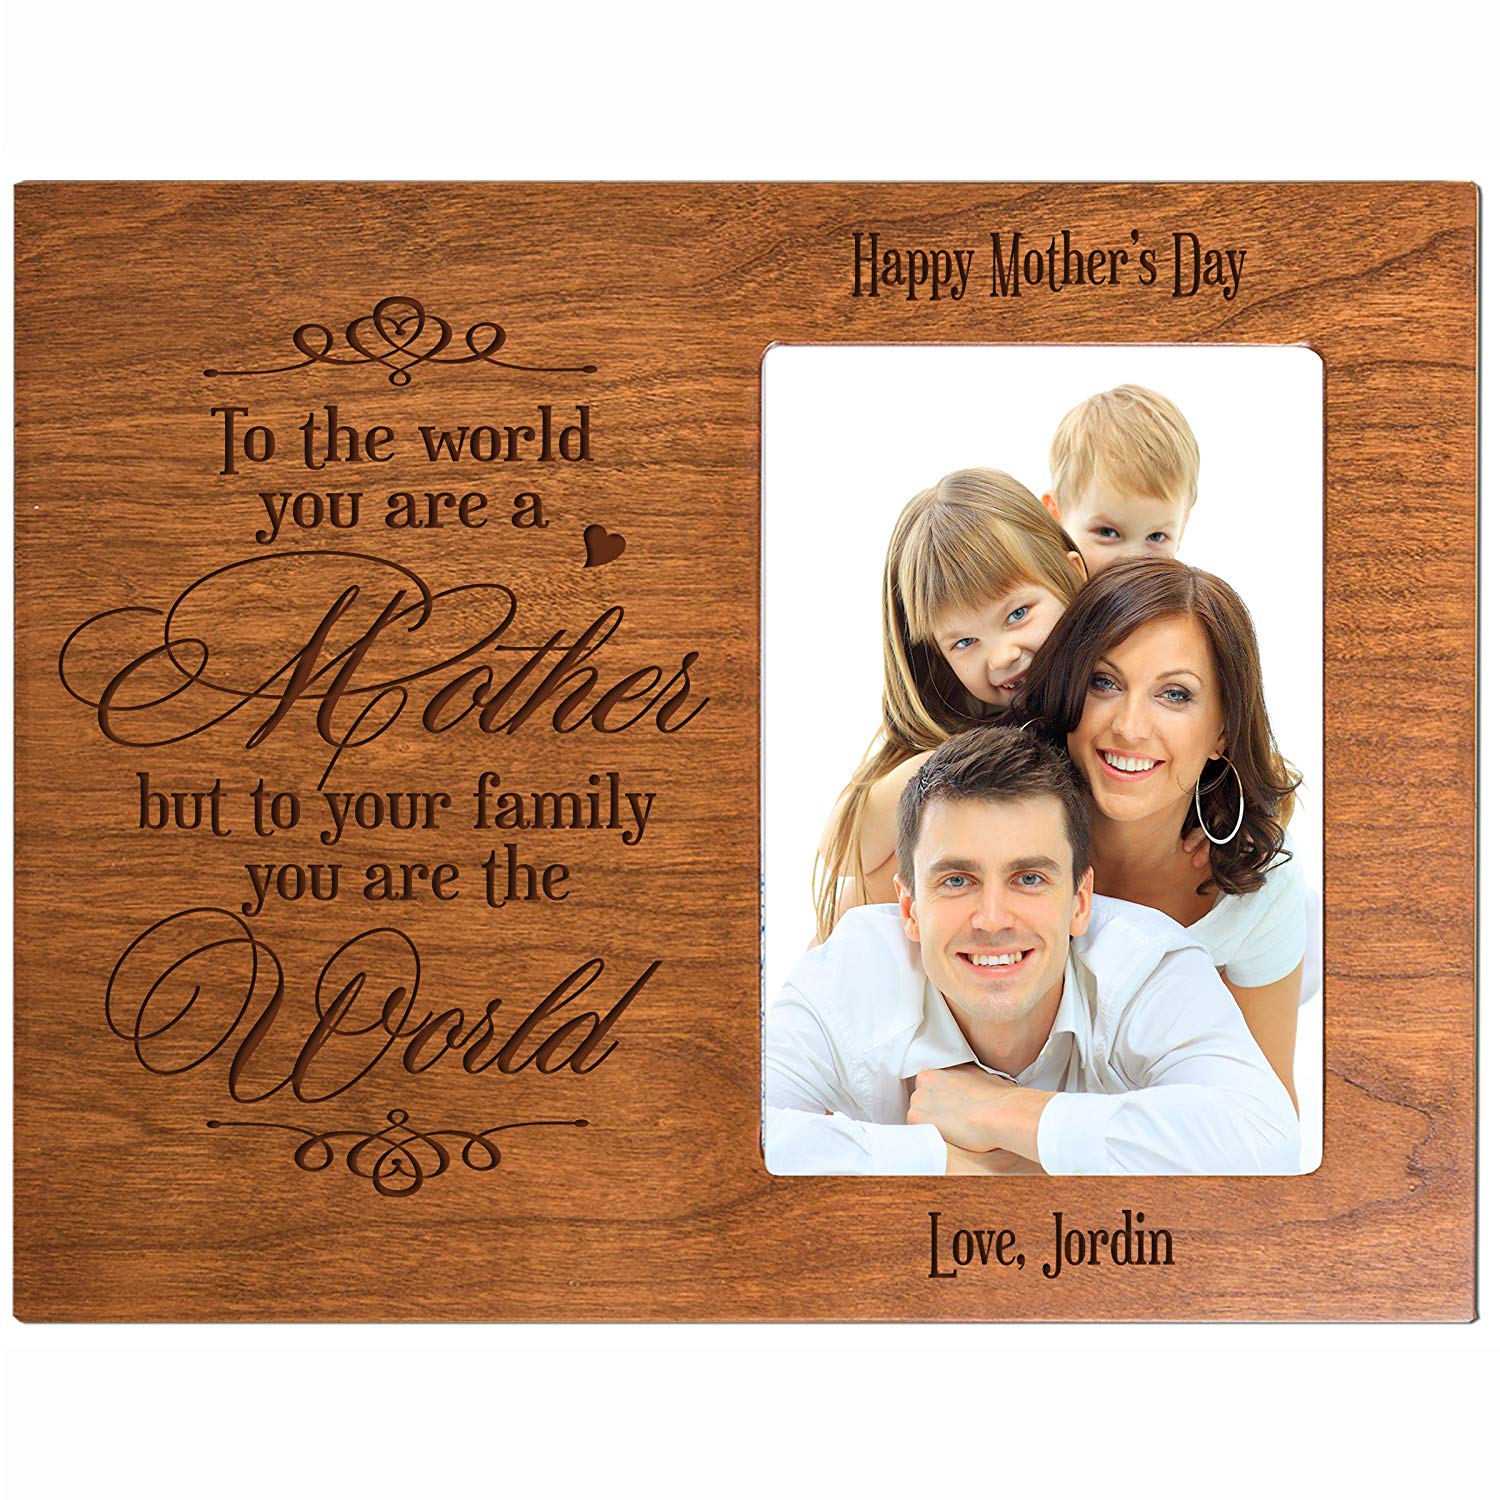 Personalized Happy Mother's Day Photo Frame - To The World